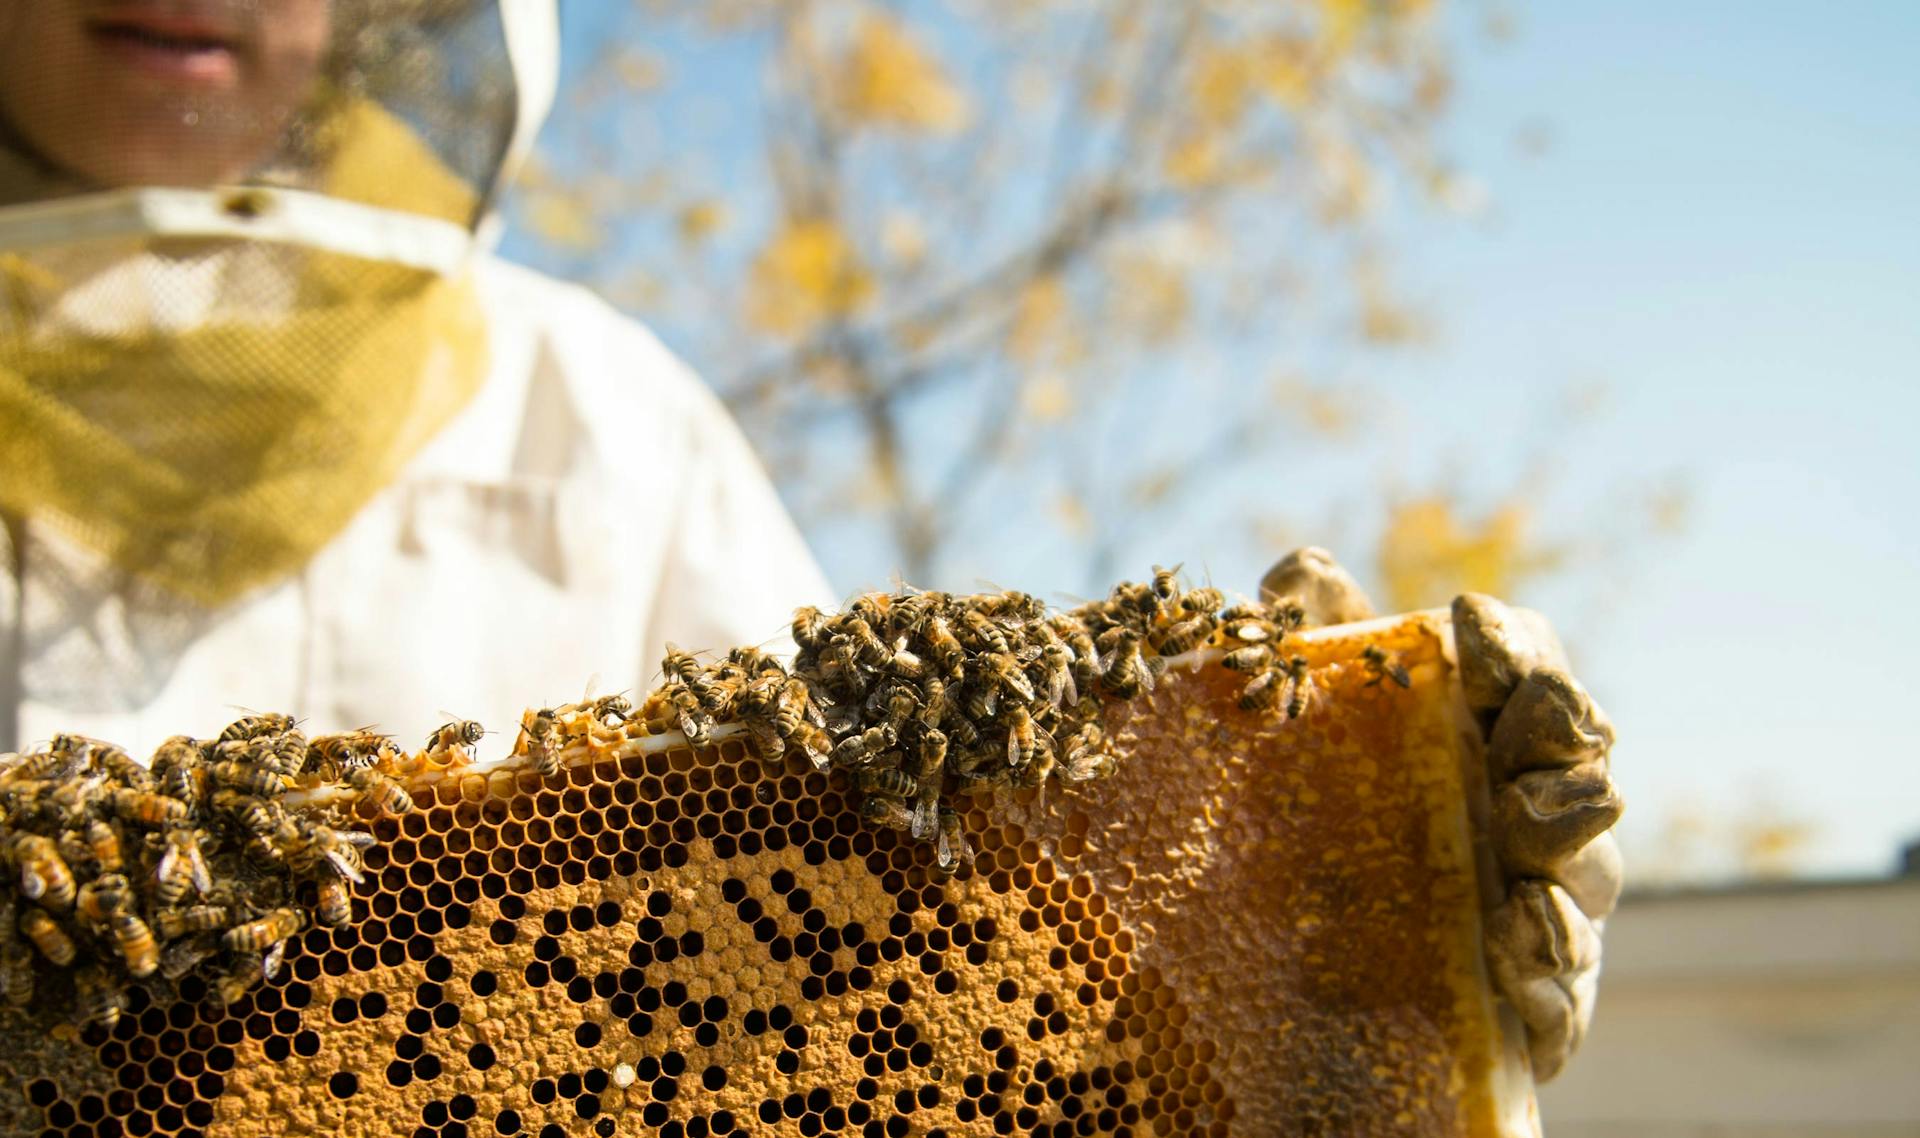 A beekeeper getting honey from a beehive.